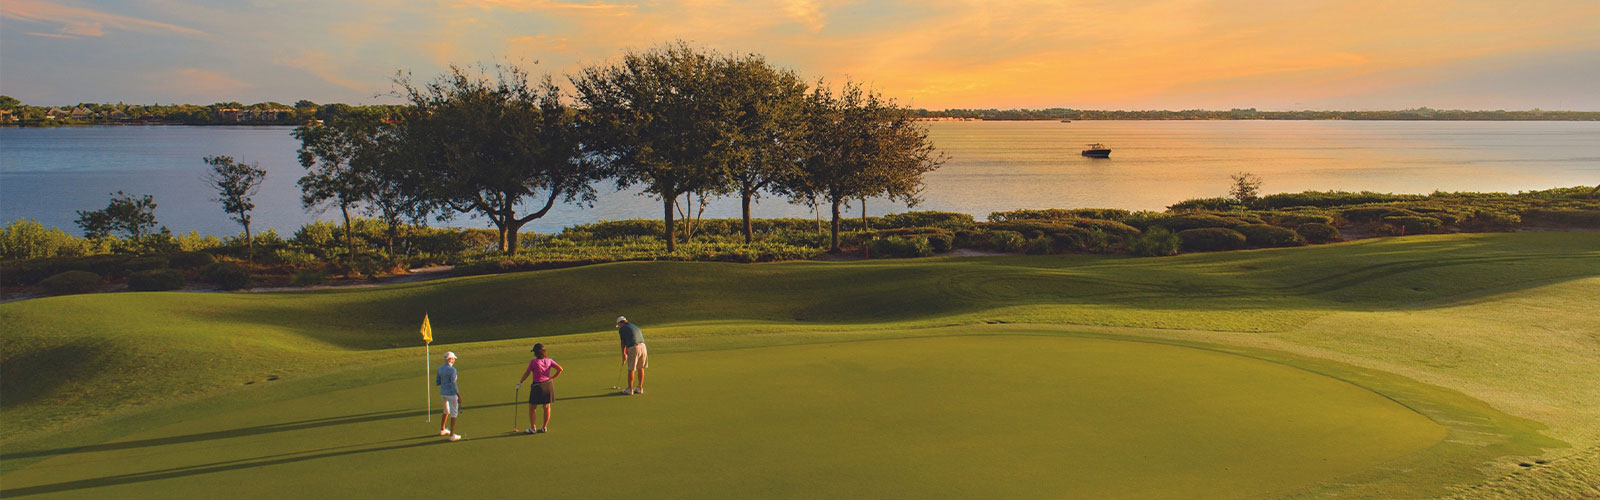 A Guide to Great Golf on Florida’s East Coast